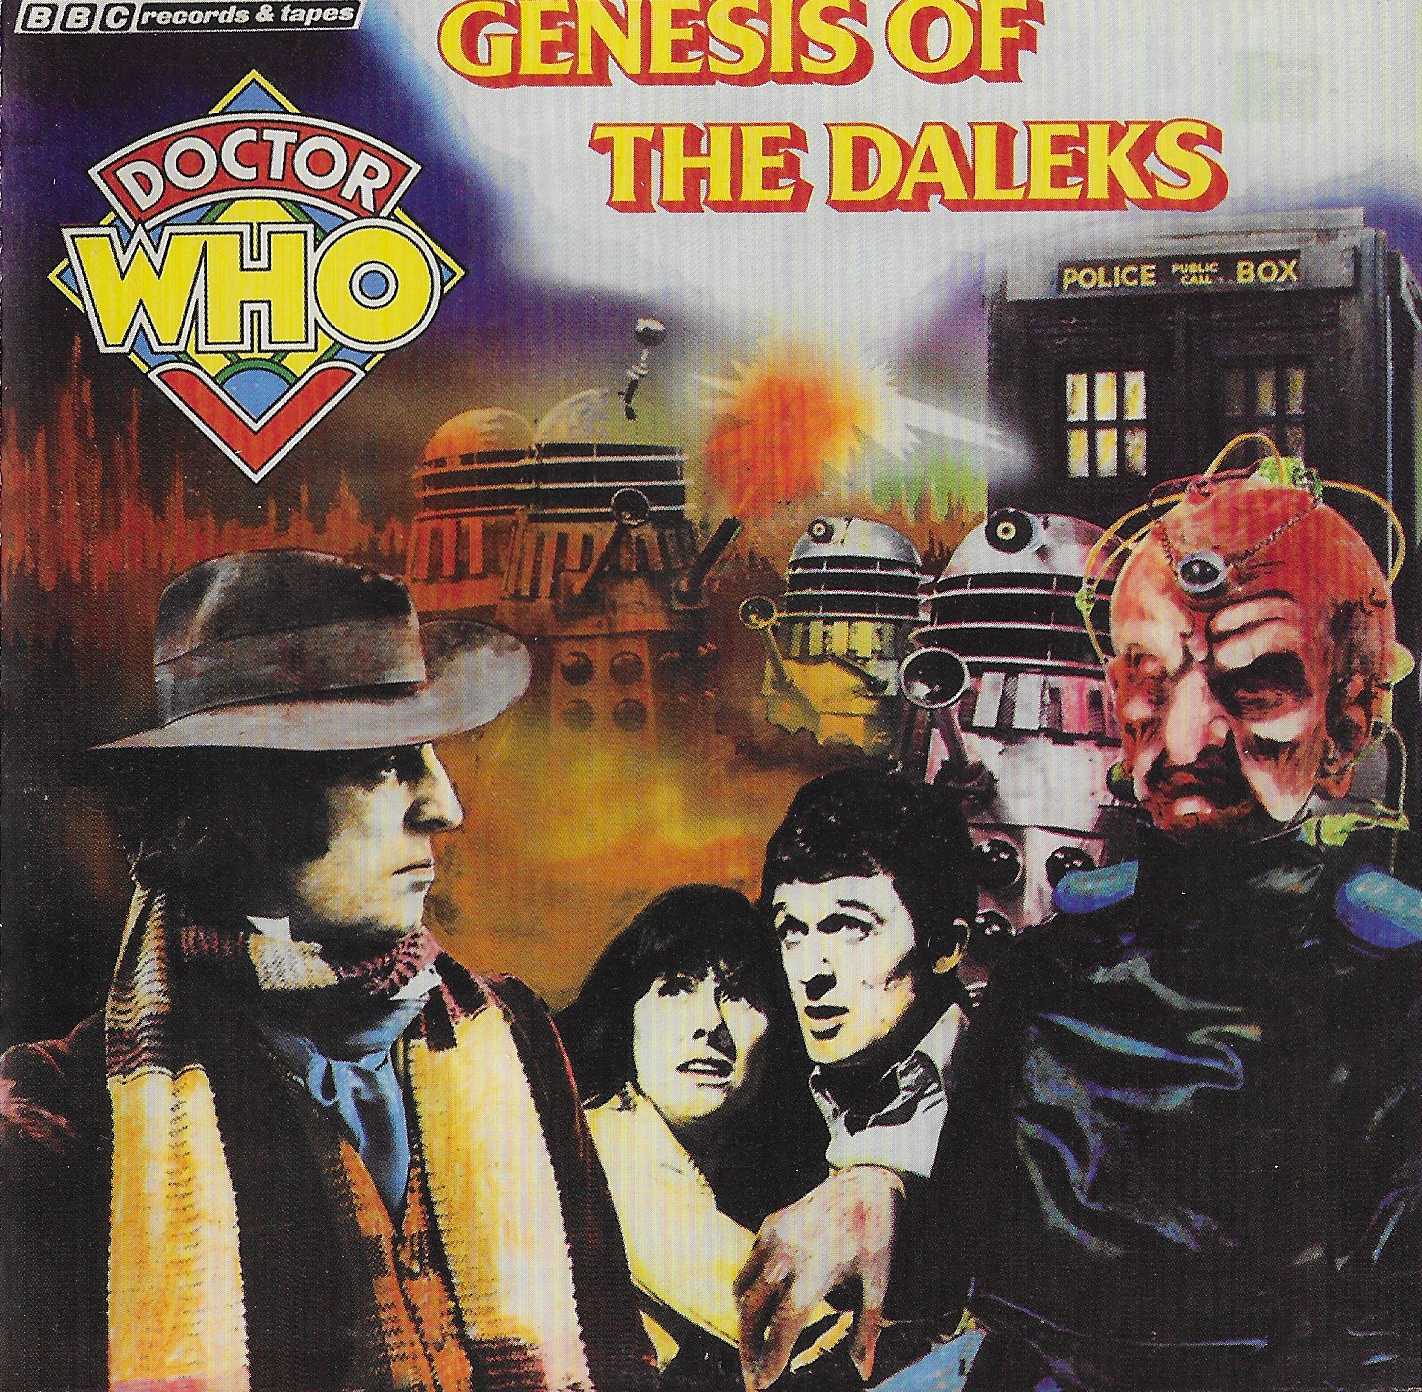 Picture of Doctor Who - Genesis of the Daleks by artist Terry Nation from the BBC cds - Records and Tapes library